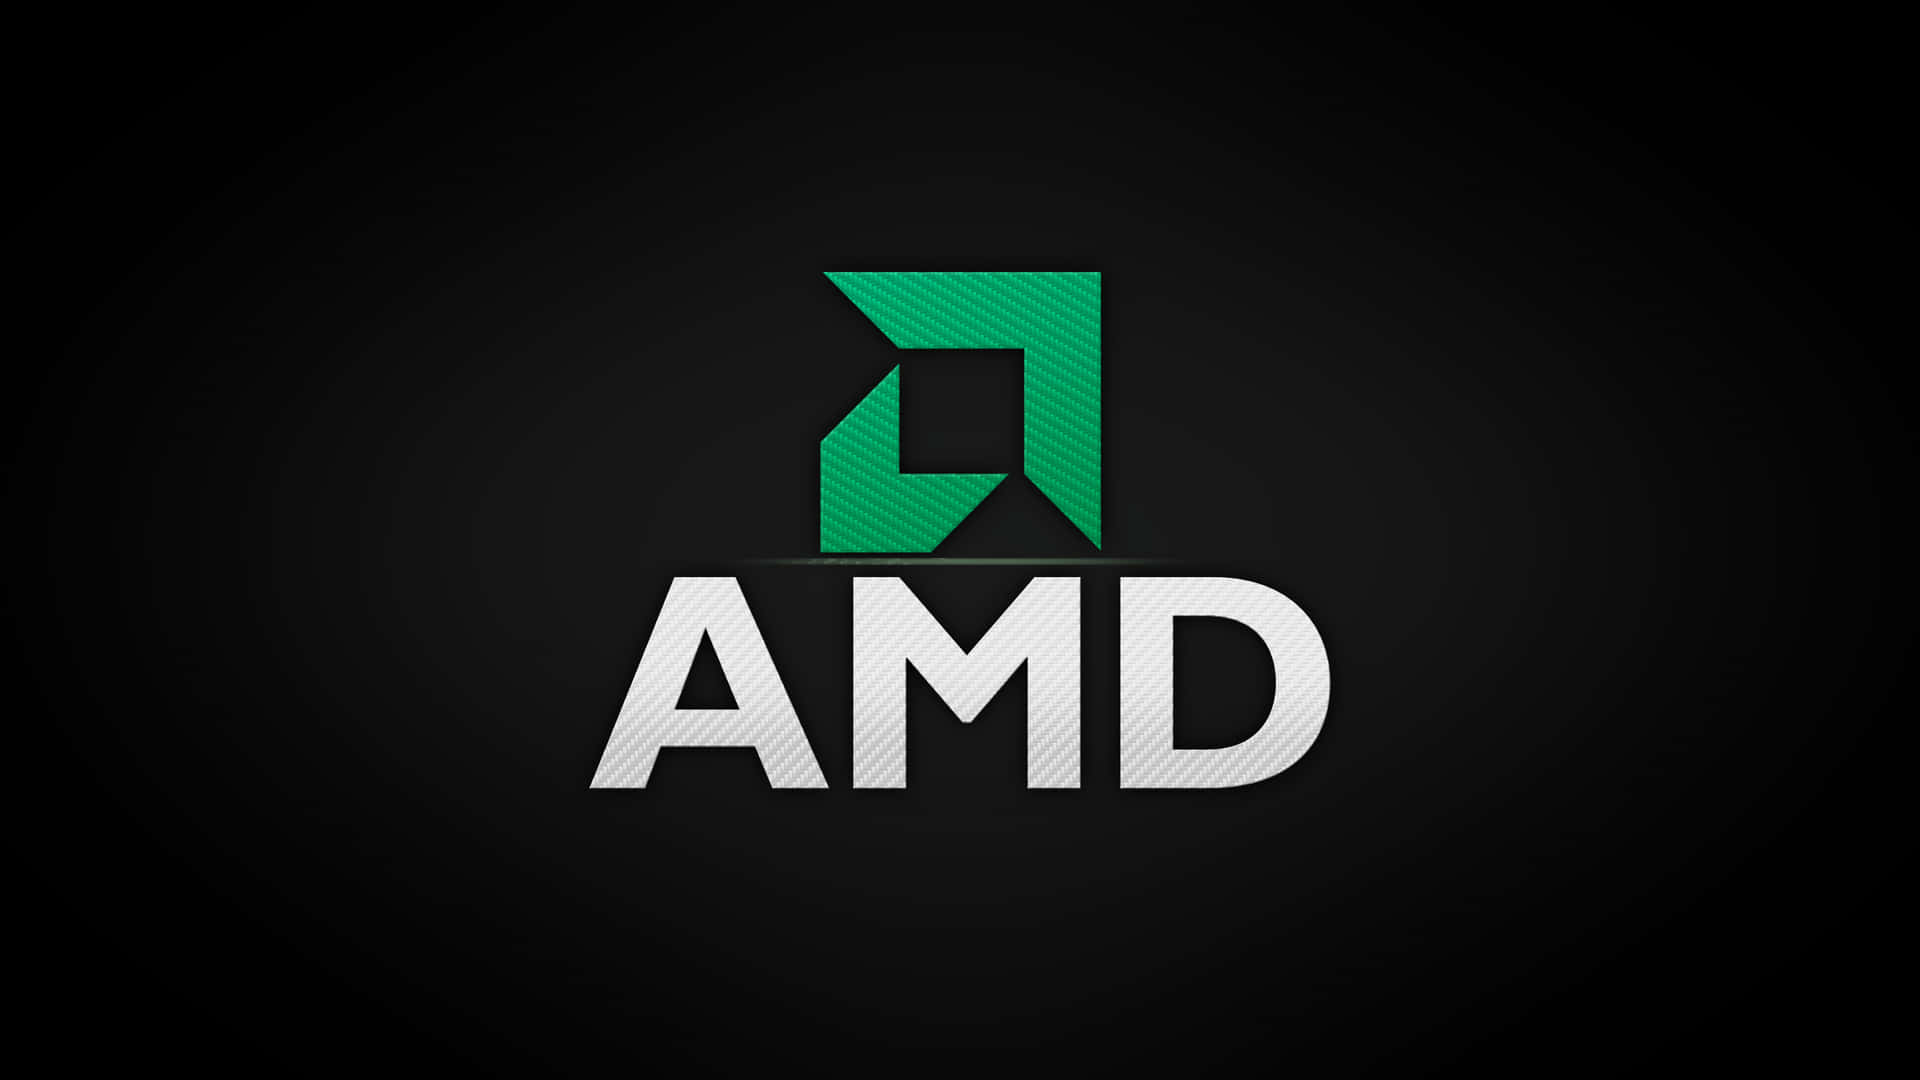 The Advanced Micro Devices logo set against a blue background